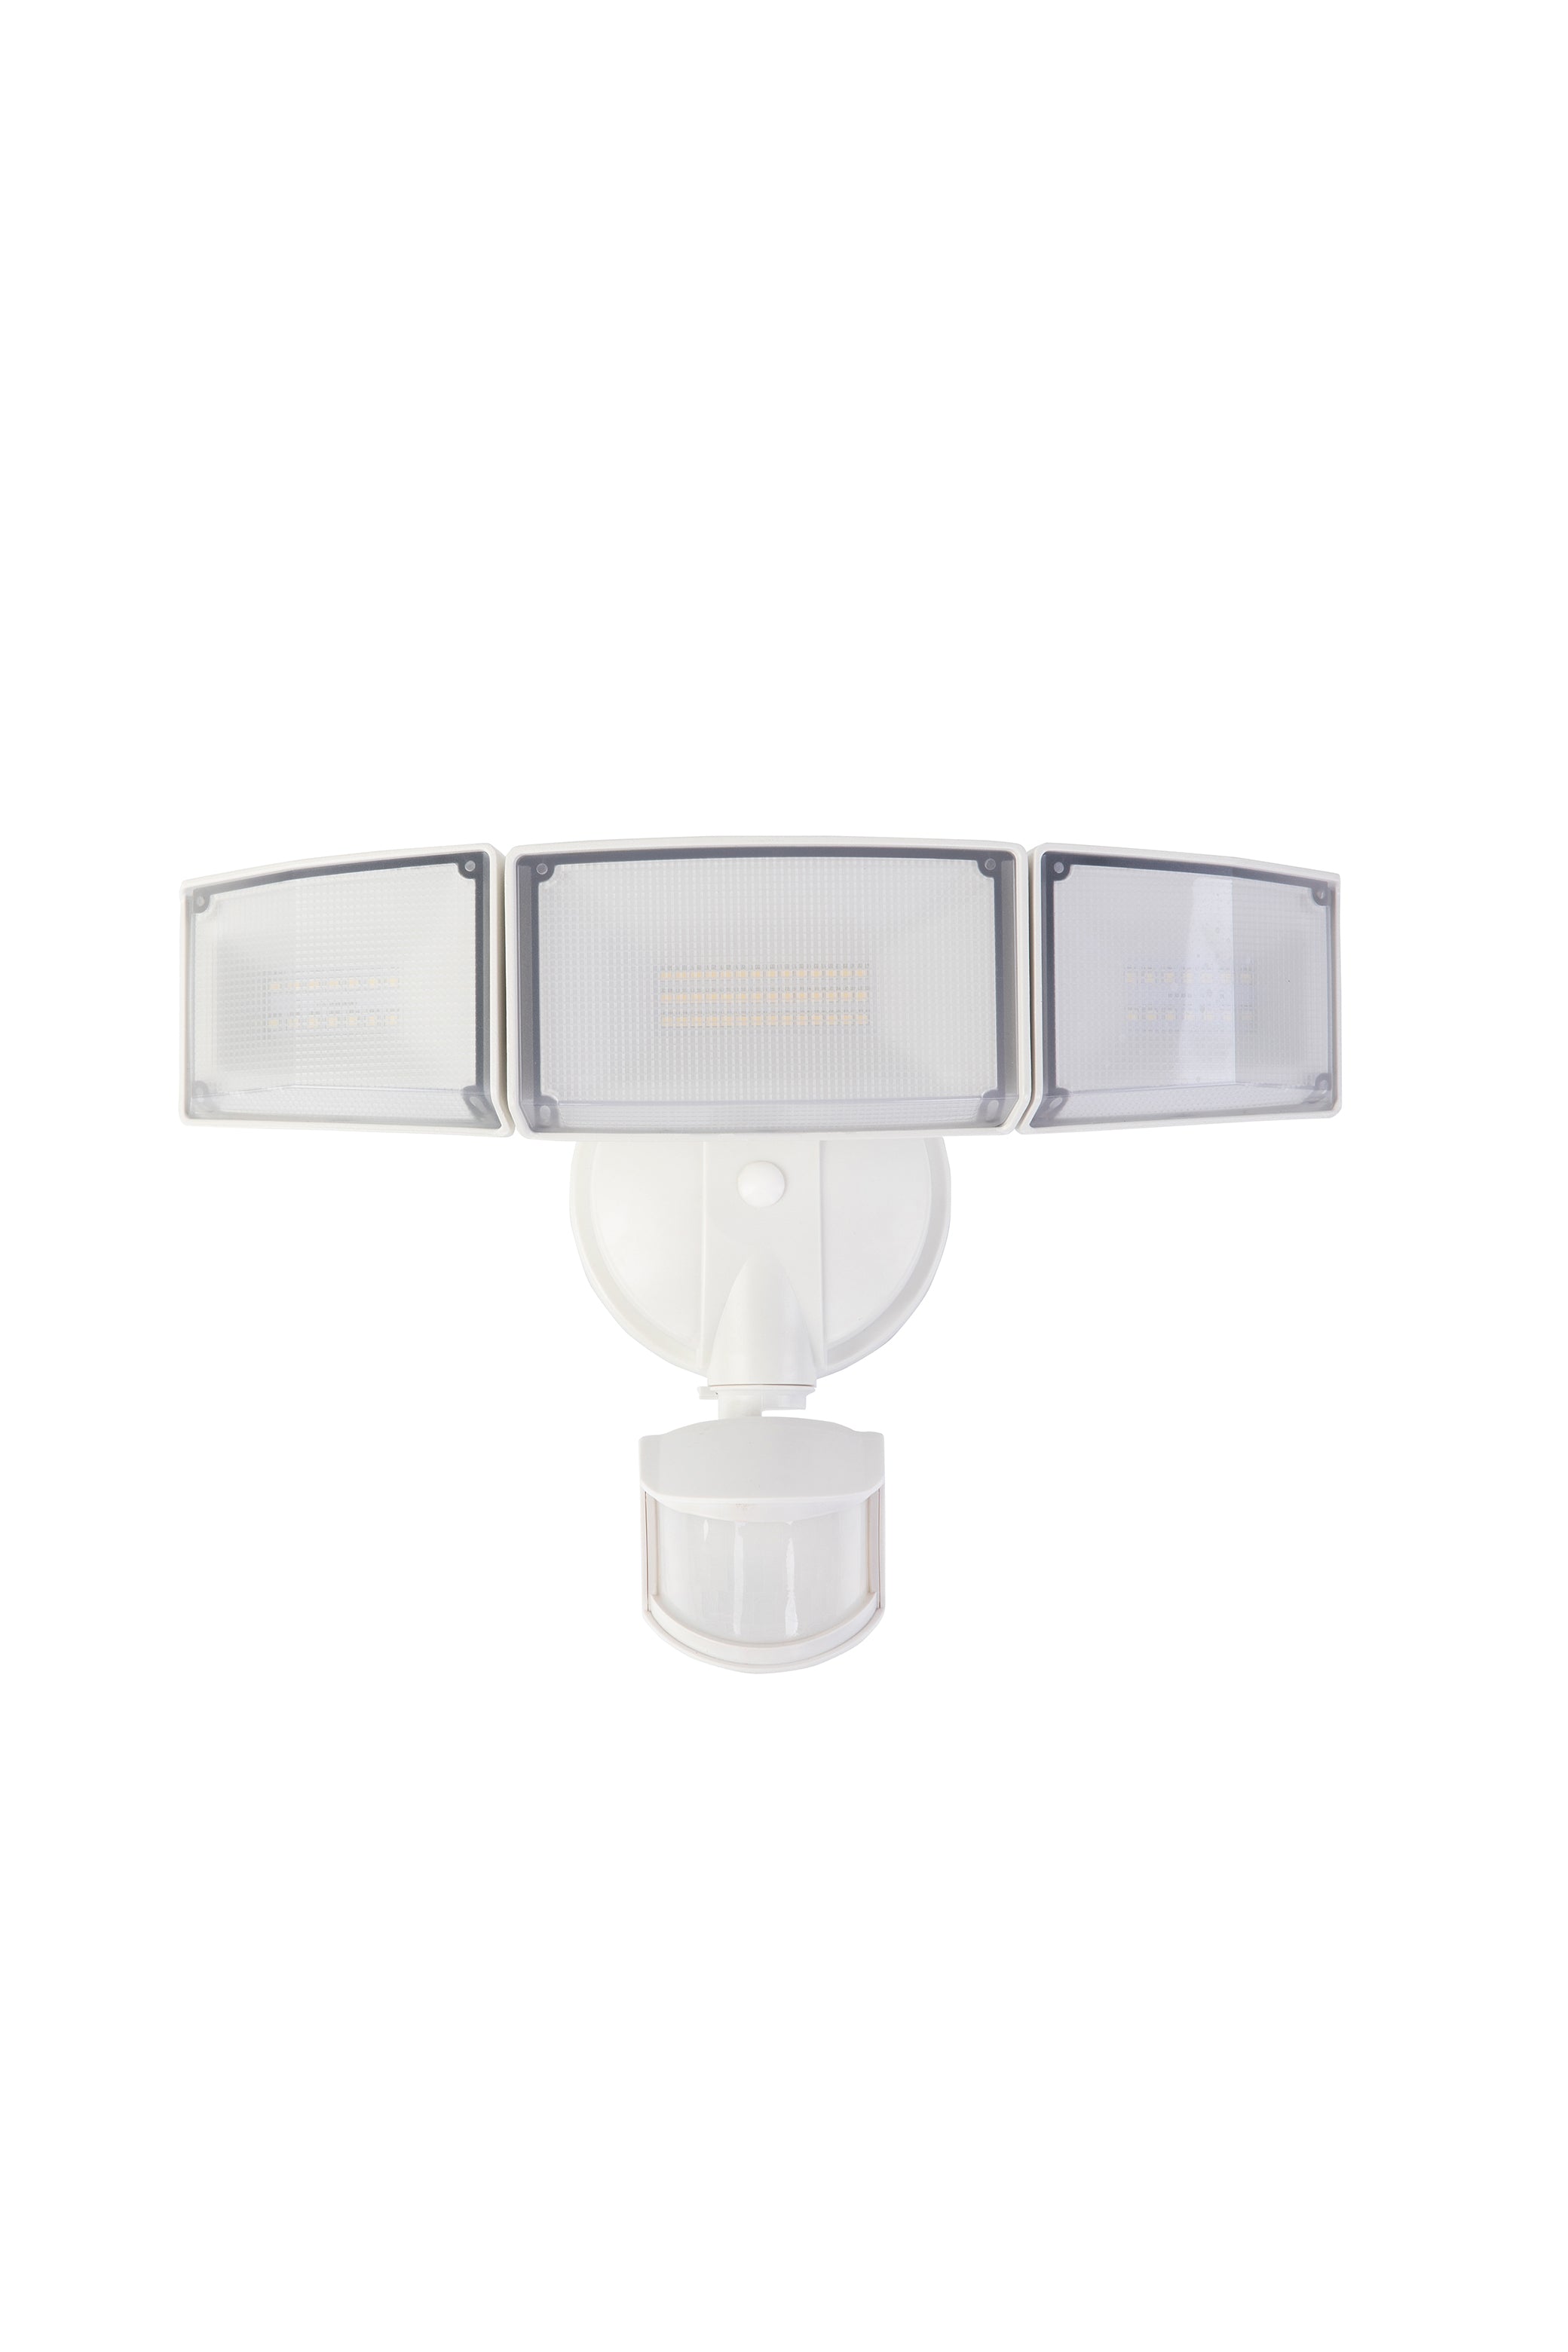 LUTEC-LUTEC-LED Security Lights with Motion Sensor, 6300LM, 5000K, 72W | Alle Lampen